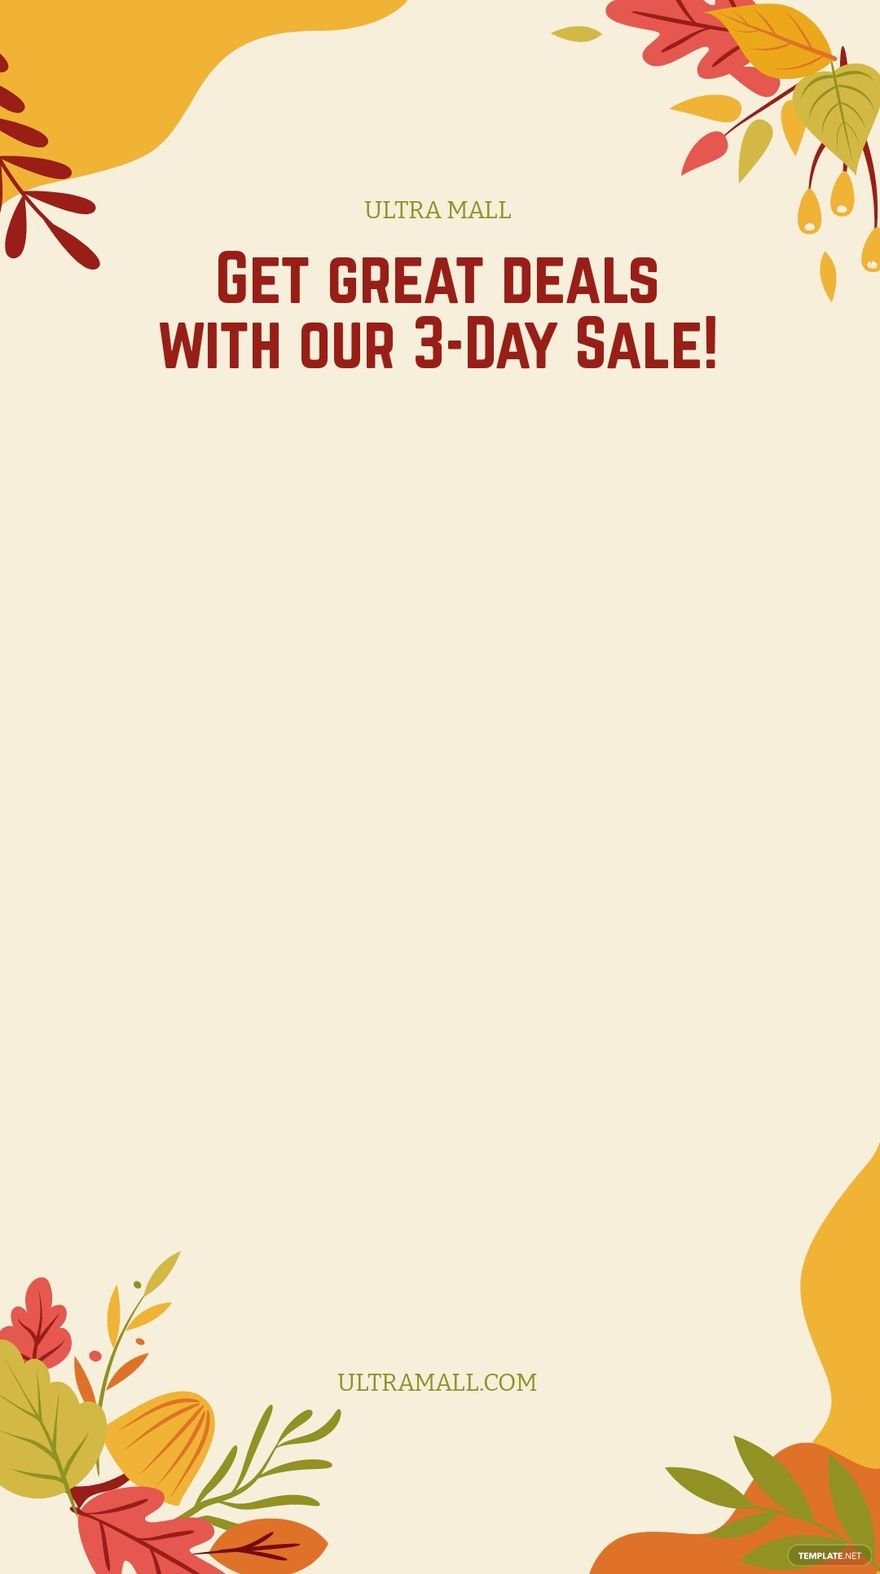 Fall/Autumn Sale Promotion Snapchat Geofilter